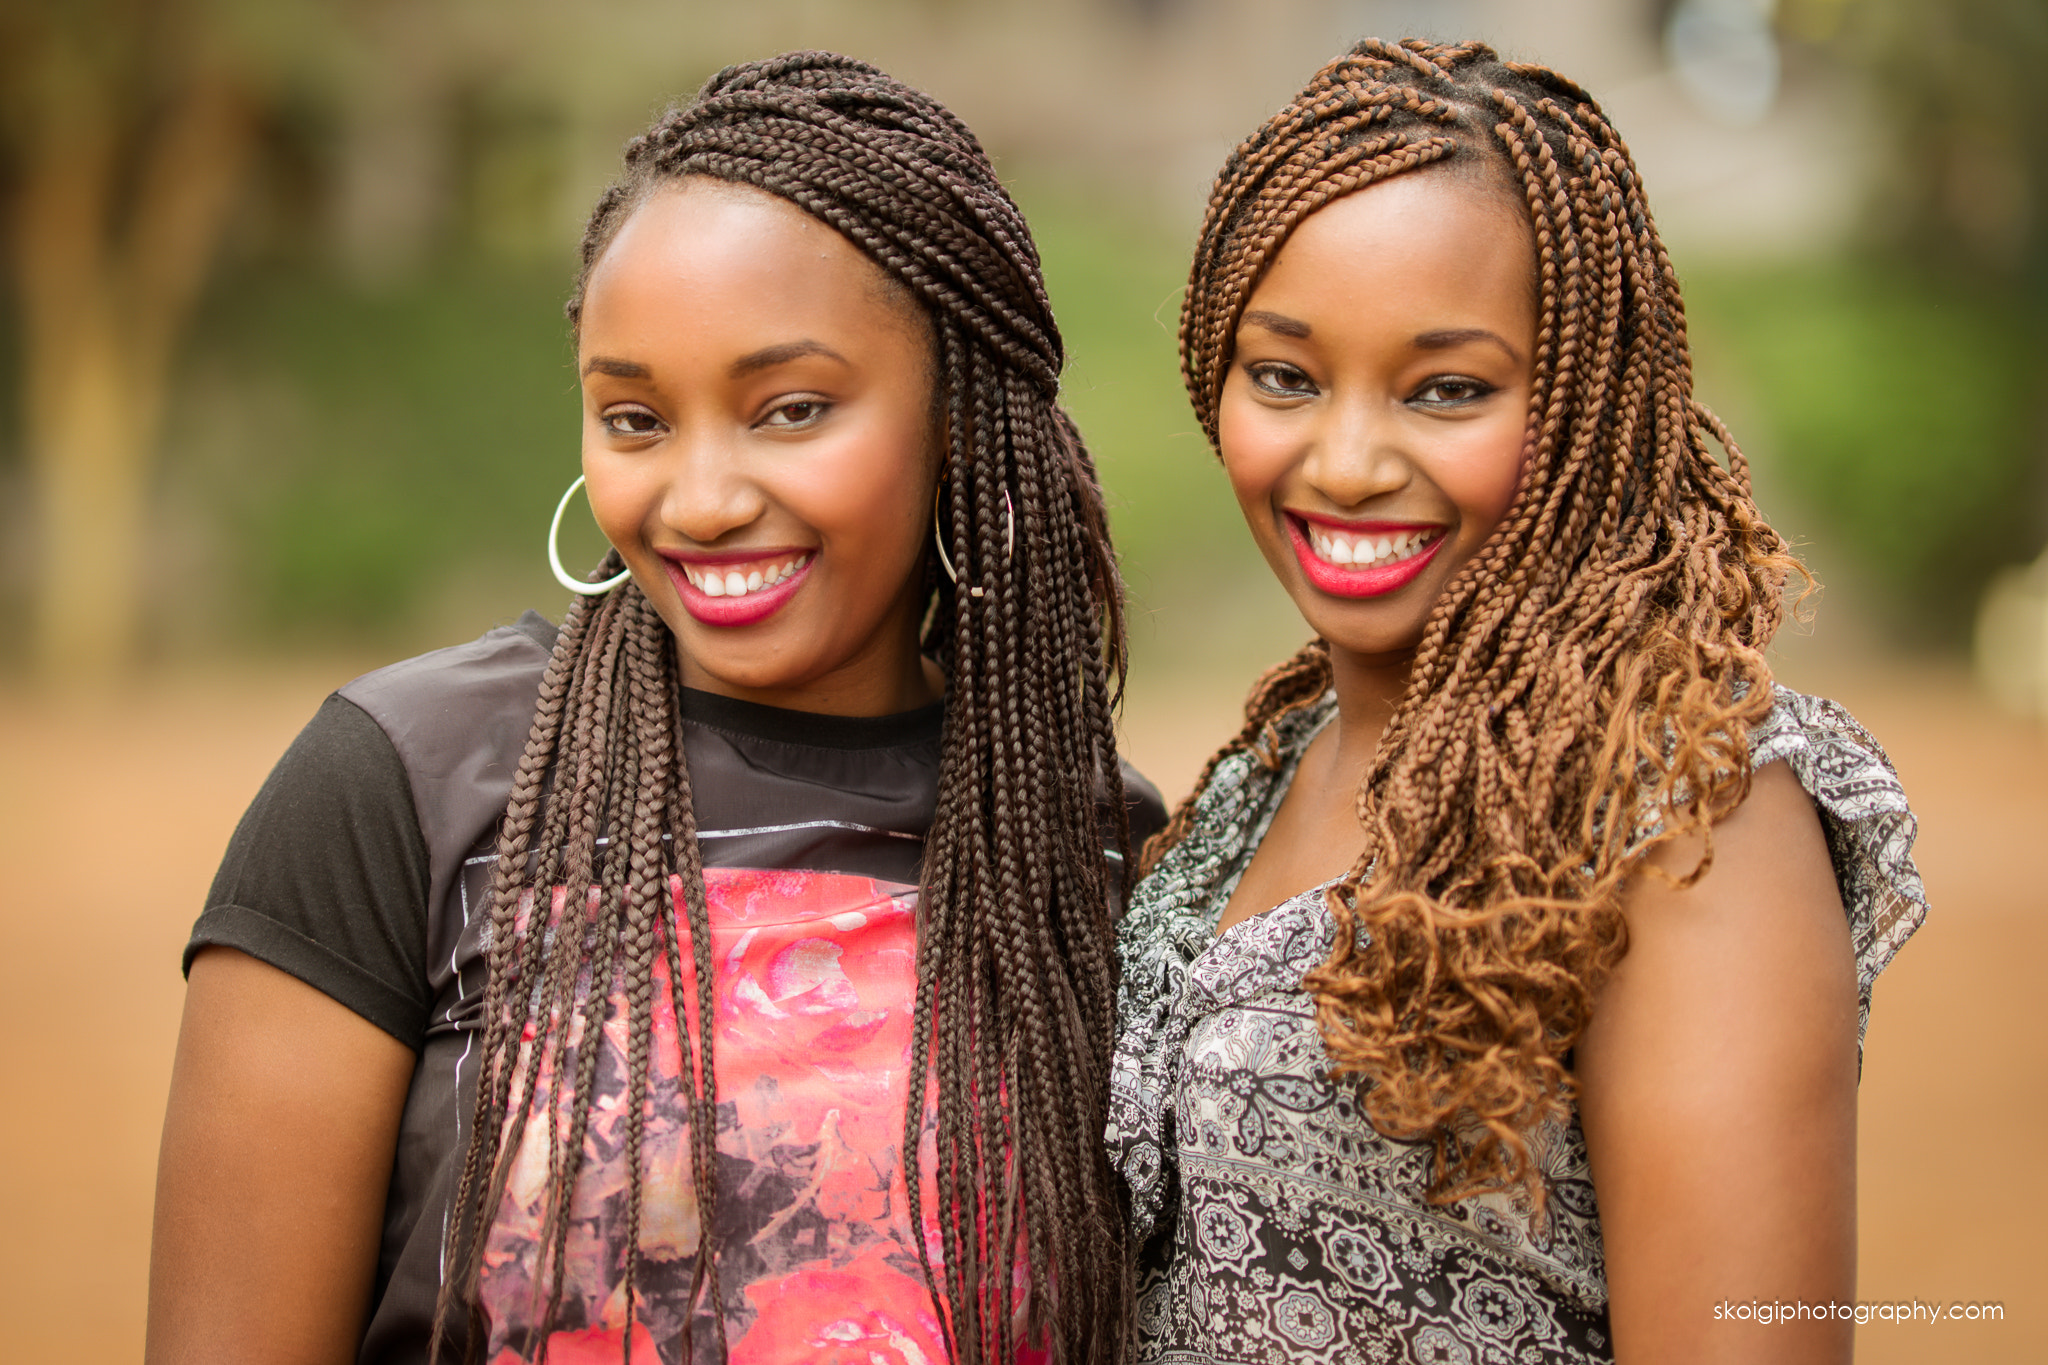 Samsung NX1 + Samsung NX 85mm F1.4 ED SSA sample photo. Identical twins with identical smiles photography